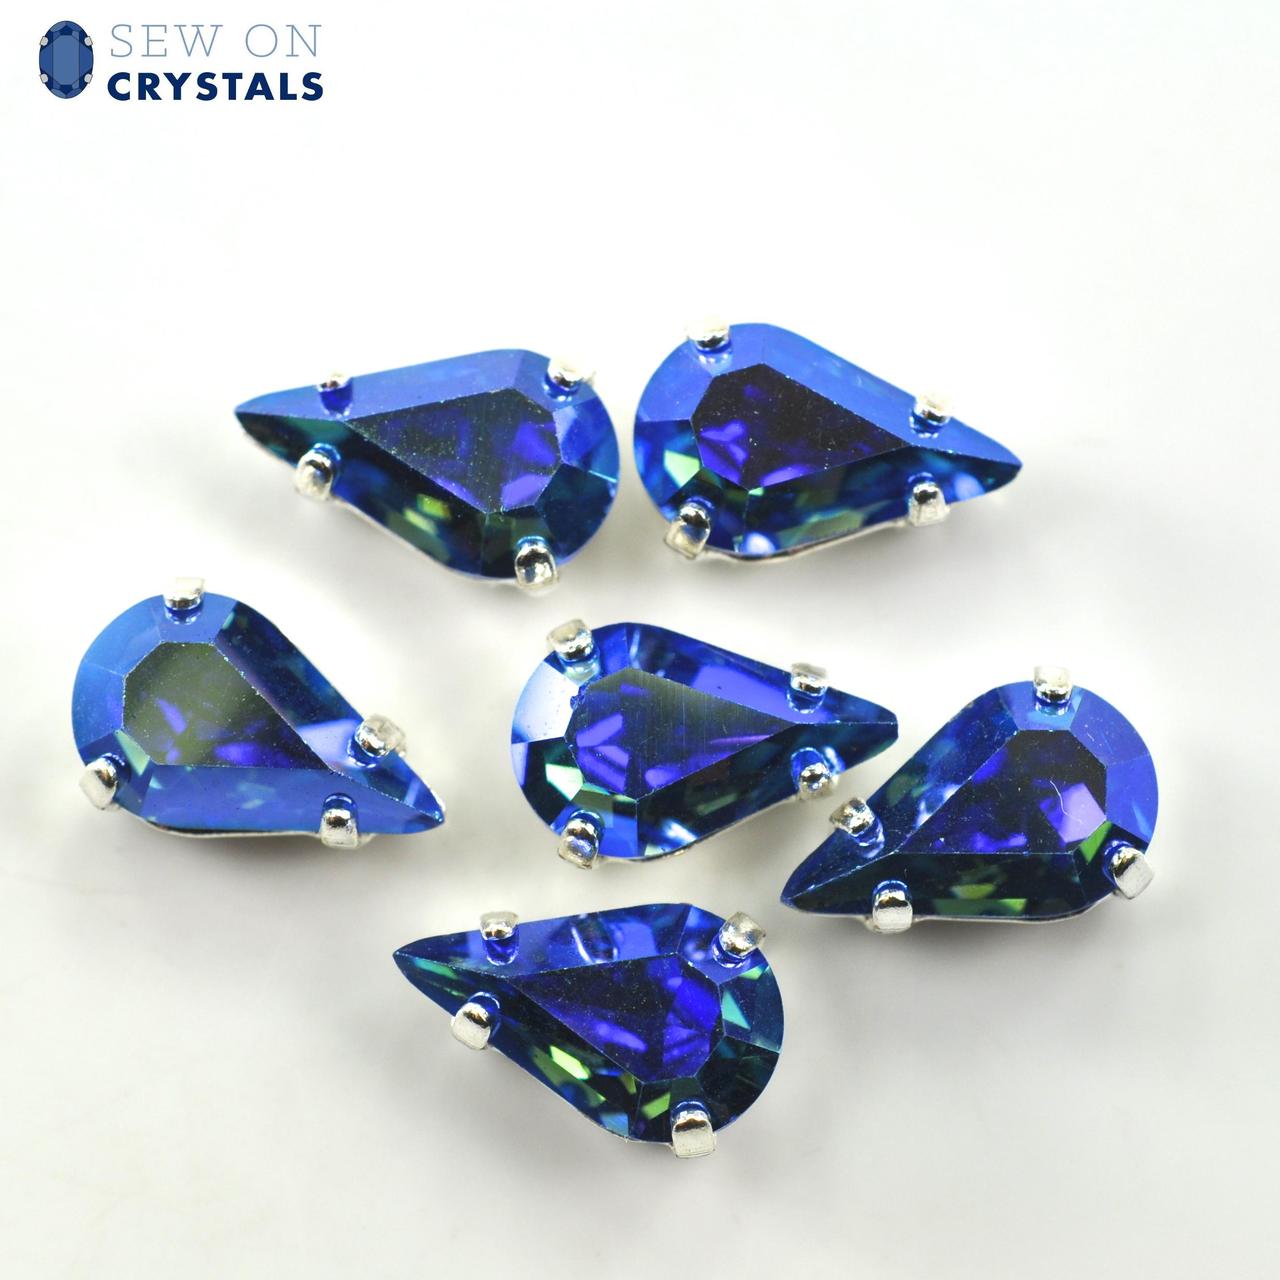 Sapphire AB 13x7.8mm Pear Sew On Crystals - 6 Pieces